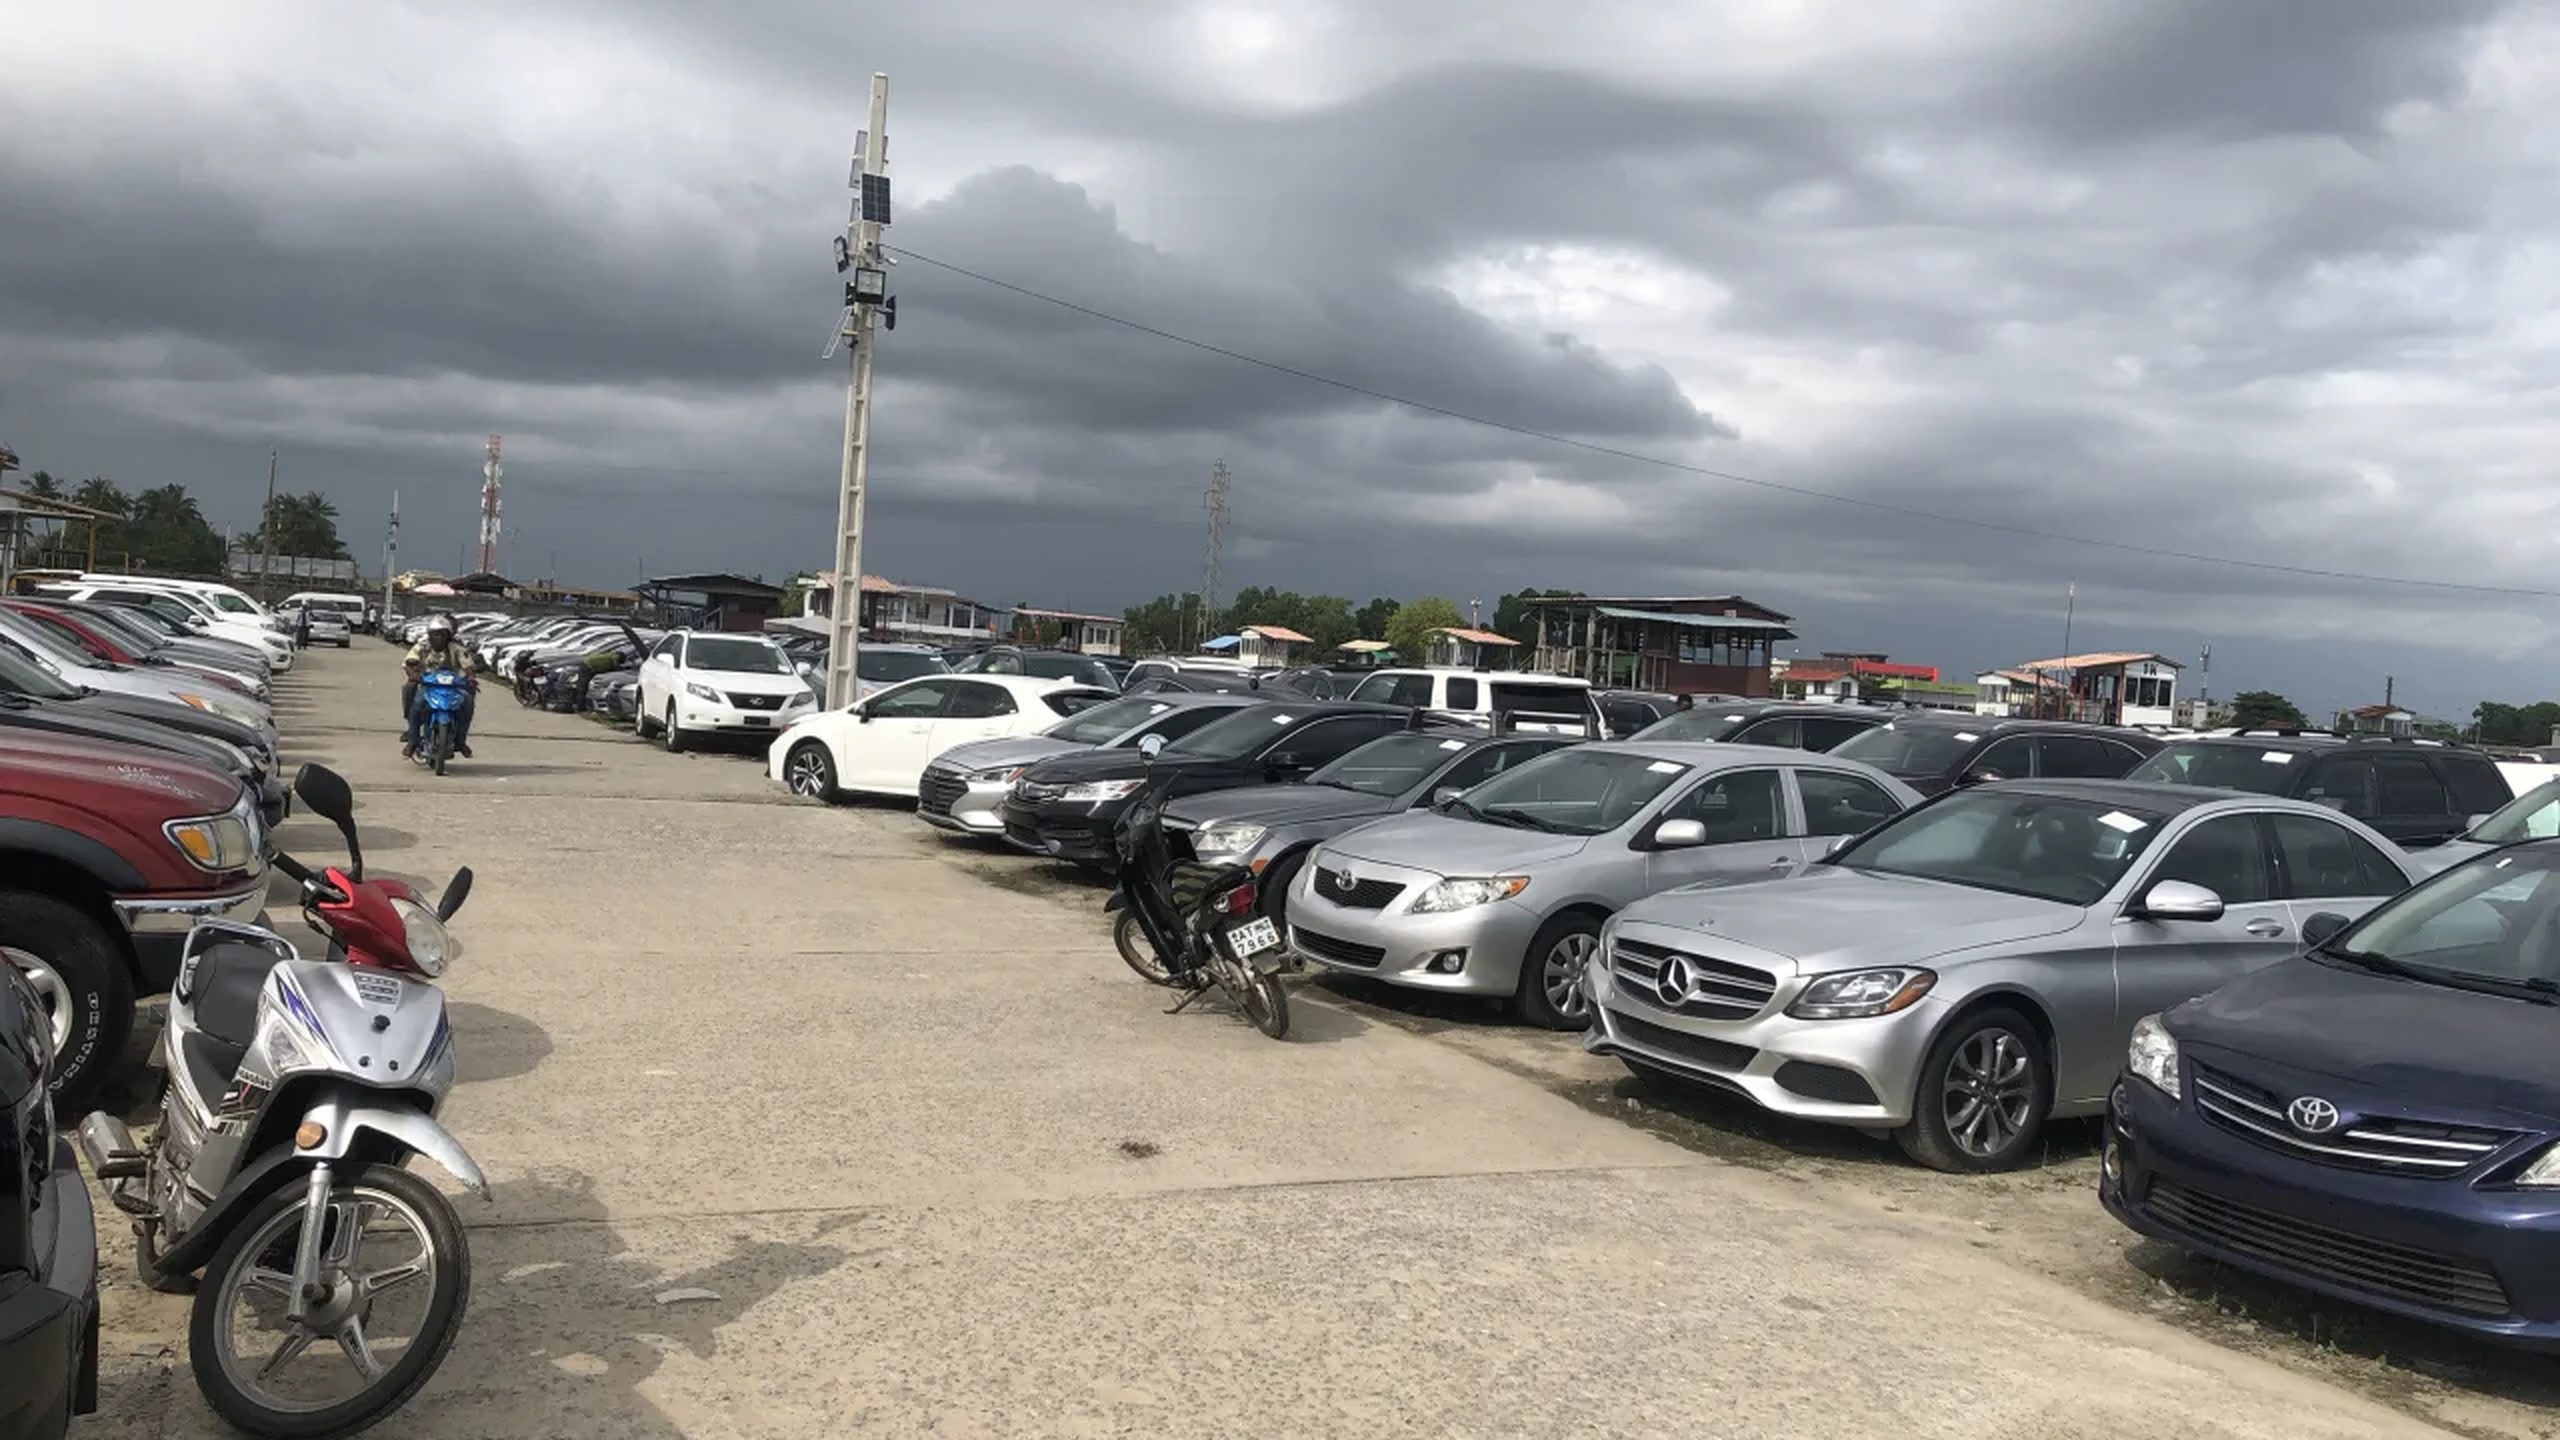 Used cars from wealthy countries such as Japan, South Korea, European countries, and the US are lined up in the Fifa Park car lot in Cotonou, Benin. Photo: Nimi Princewill / CNN